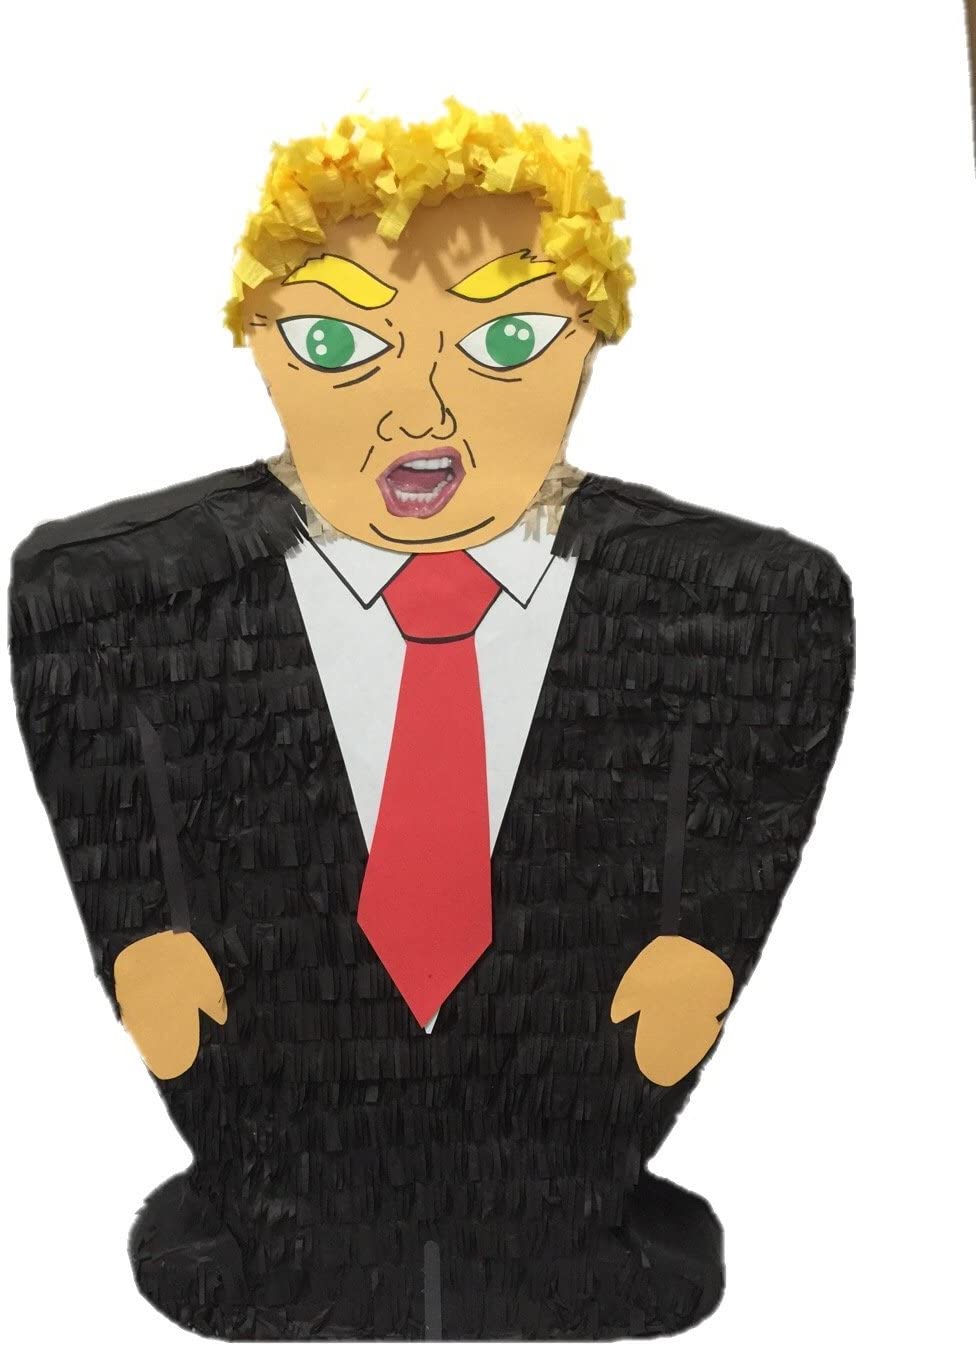 Donald T Pinata Presidential Candidate 2023 Elections